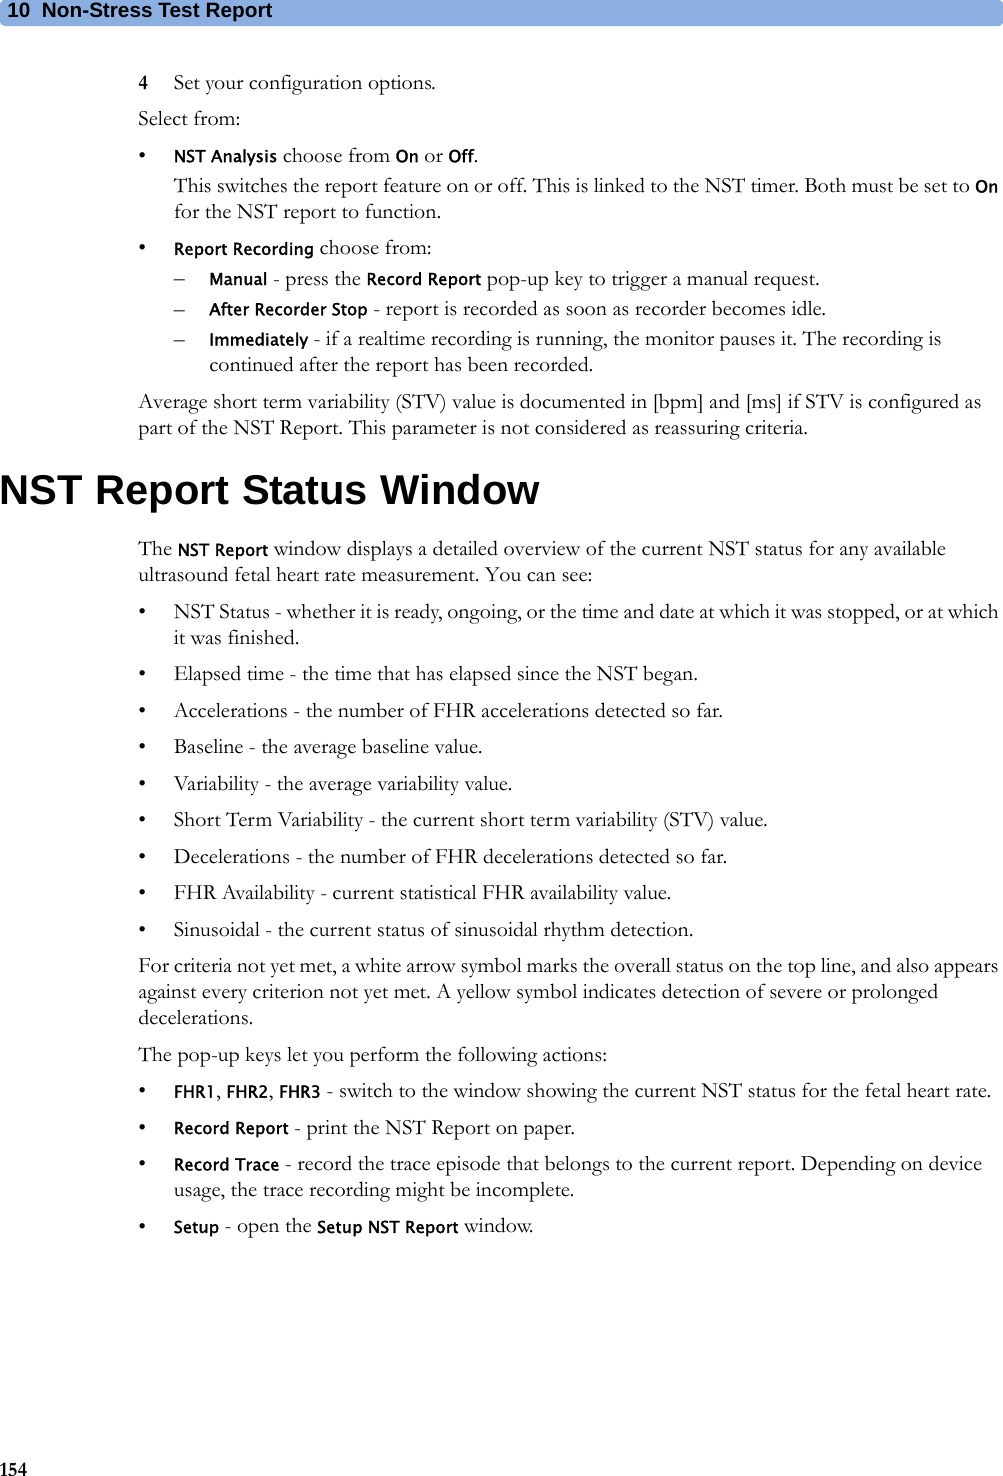 10  Non-Stress Test Report1544Set your configuration options.Select from:•NST Analysis choose from On or Off.This switches the report feature on or off. This is linked to the NST timer. Both must be set to On for the NST report to function.•Report Recording choose from:–Manual - press the Record Report pop-up key to trigger a manual request.–After Recorder Stop - report is recorded as soon as recorder becomes idle.–Immediately - if a realtime recording is running, the monitor pauses it. The recording is continued after the report has been recorded.Average short term variability (STV) value is documented in [bpm] and [ms] if STV is configured as part of the NST Report. This parameter is not considered as reassuring criteria.NST Report Status WindowThe NST Report window displays a detailed overview of the current NST status for any available ultrasound fetal heart rate measurement. You can see:• NST Status - whether it is ready, ongoing, or the time and date at which it was stopped, or at which it was finished.• Elapsed time - the time that has elapsed since the NST began.• Accelerations - the number of FHR accelerations detected so far.• Baseline - the average baseline value.• Variability - the average variability value.• Short Term Variability - the current short term variability (STV) value.• Decelerations - the number of FHR decelerations detected so far.• FHR Availability - current statistical FHR availability value.• Sinusoidal - the current status of sinusoidal rhythm detection.For criteria not yet met, a white arrow symbol marks the overall status on the top line, and also appears against every criterion not yet met. A yellow symbol indicates detection of severe or prolonged decelerations.The pop-up keys let you perform the following actions:•FHR1, FHR2, FHR3 - switch to the window showing the current NST status for the fetal heart rate.•Record Report - print the NST Report on paper.•Record Trace - record the trace episode that belongs to the current report. Depending on device usage, the trace recording might be incomplete.•Setup - open the Setup NST Report window.